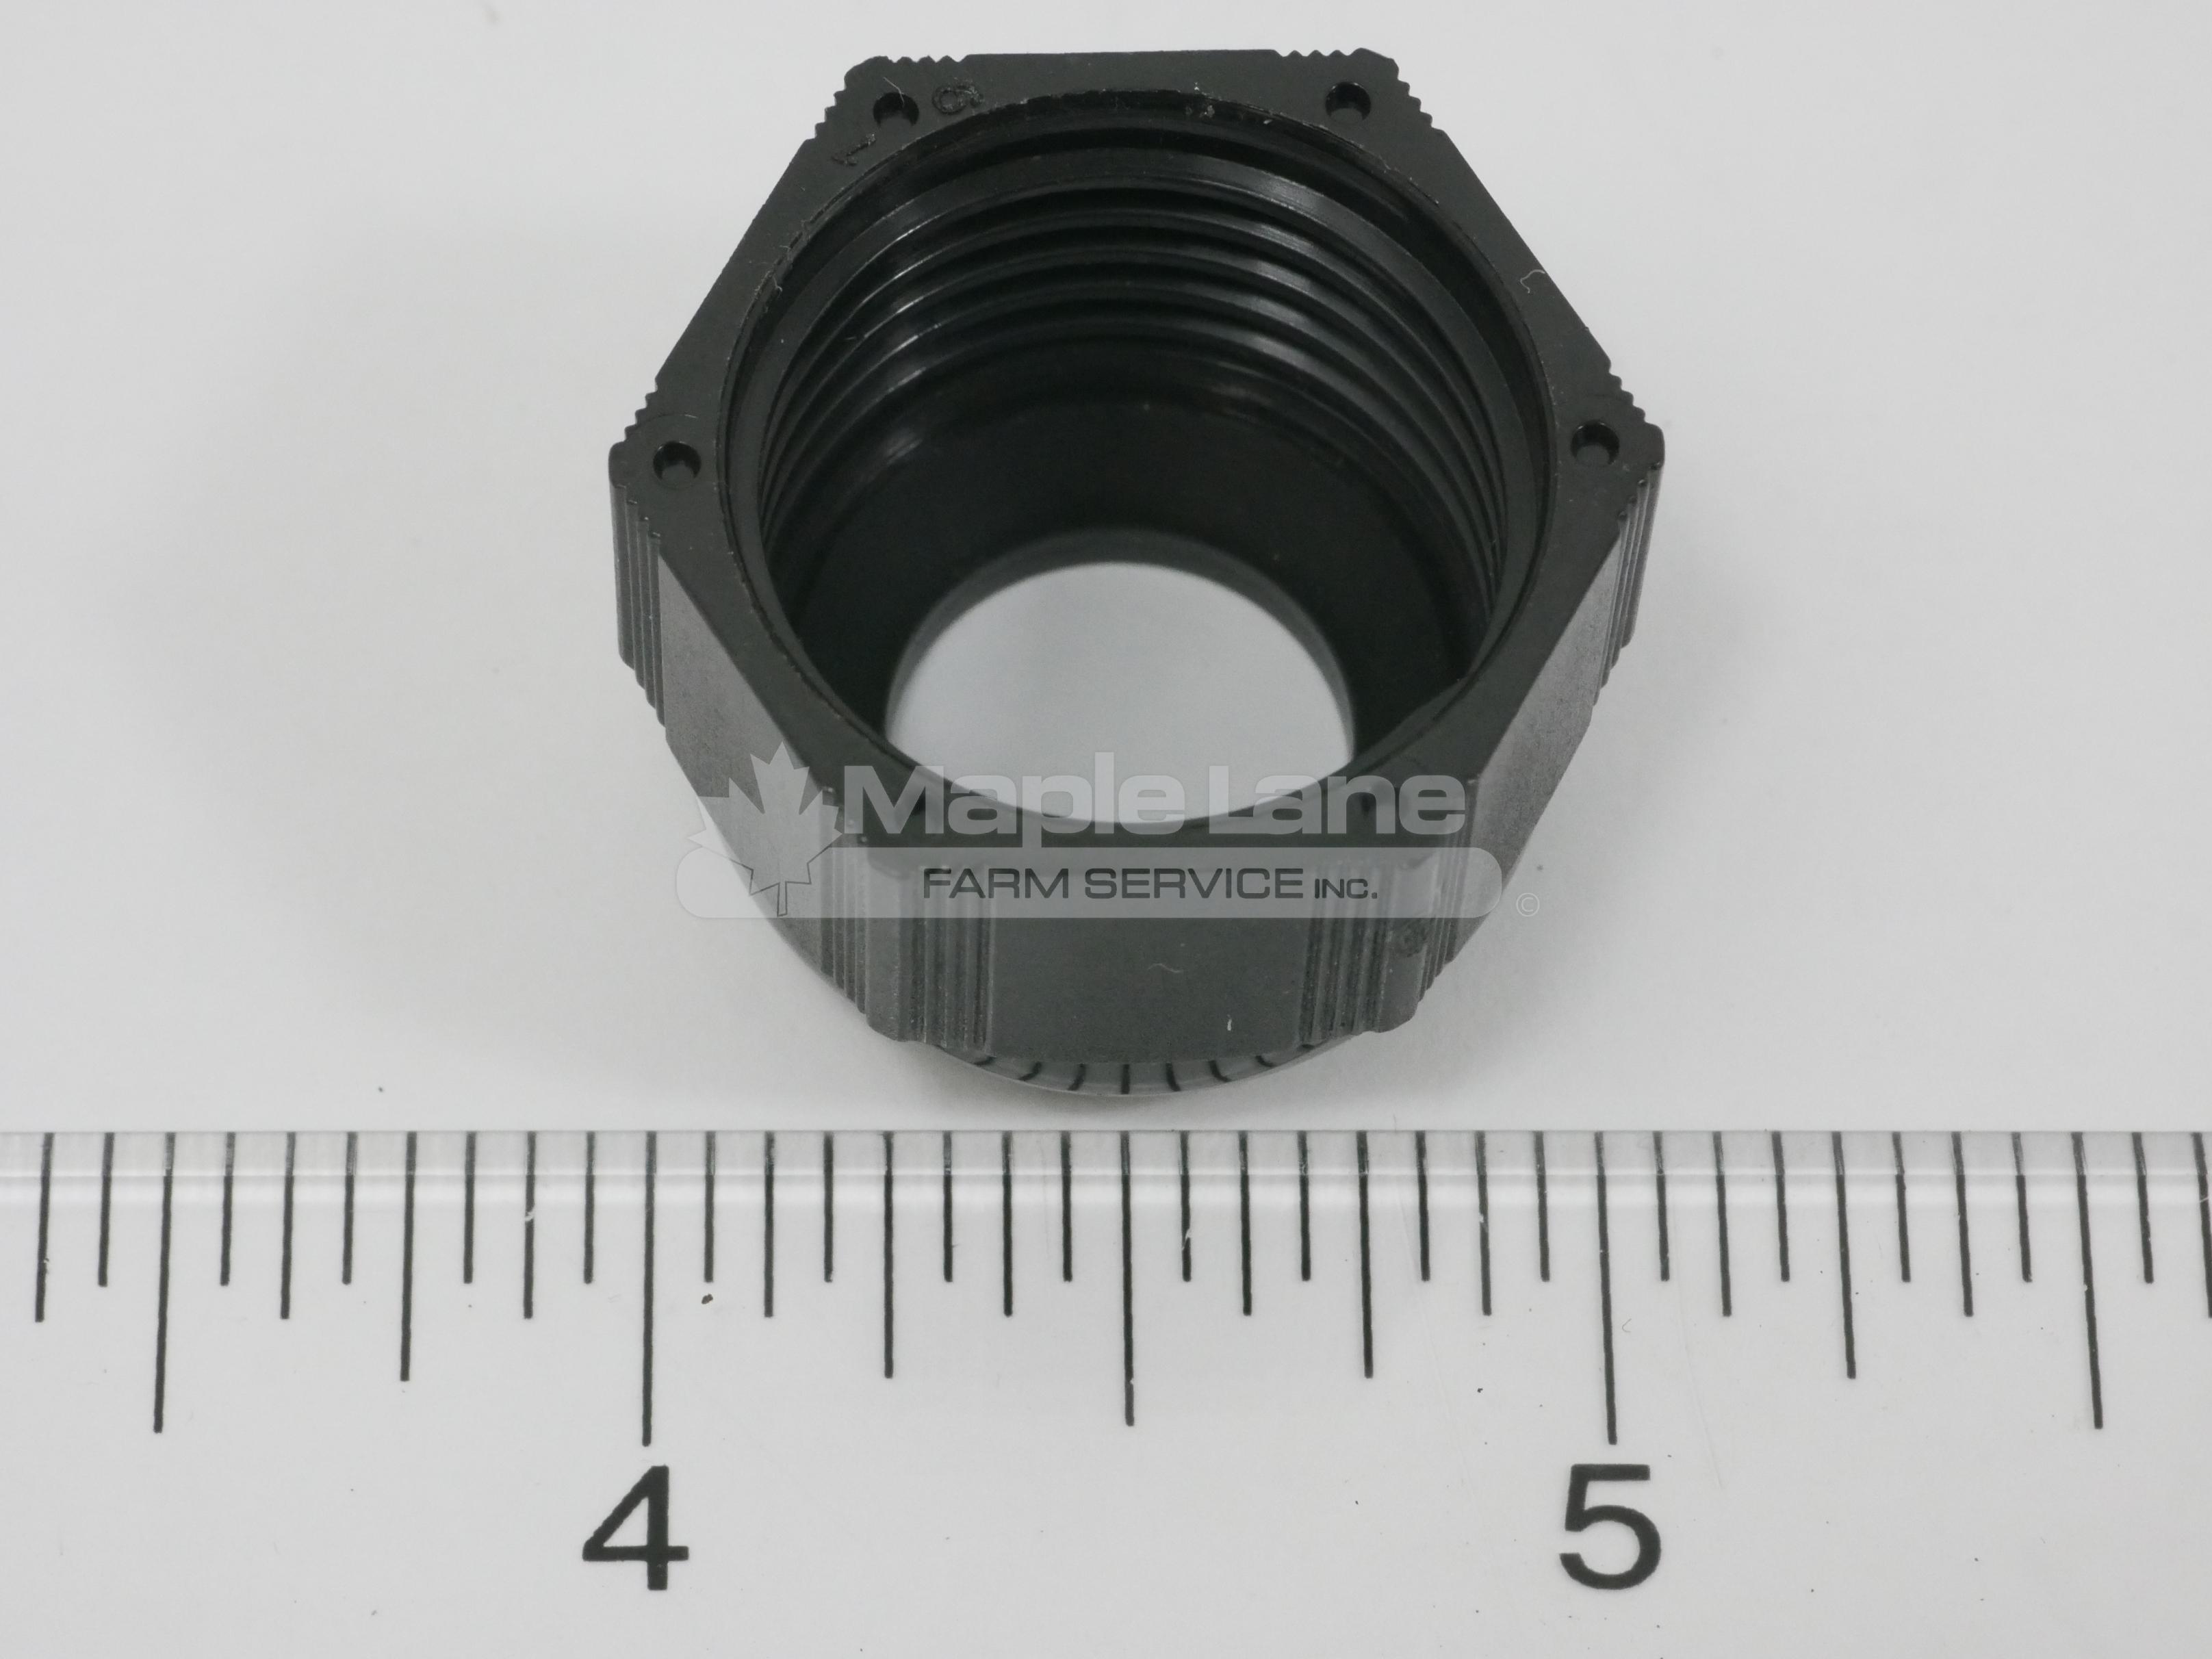 TL550-100-082 Wire Arm Clamp